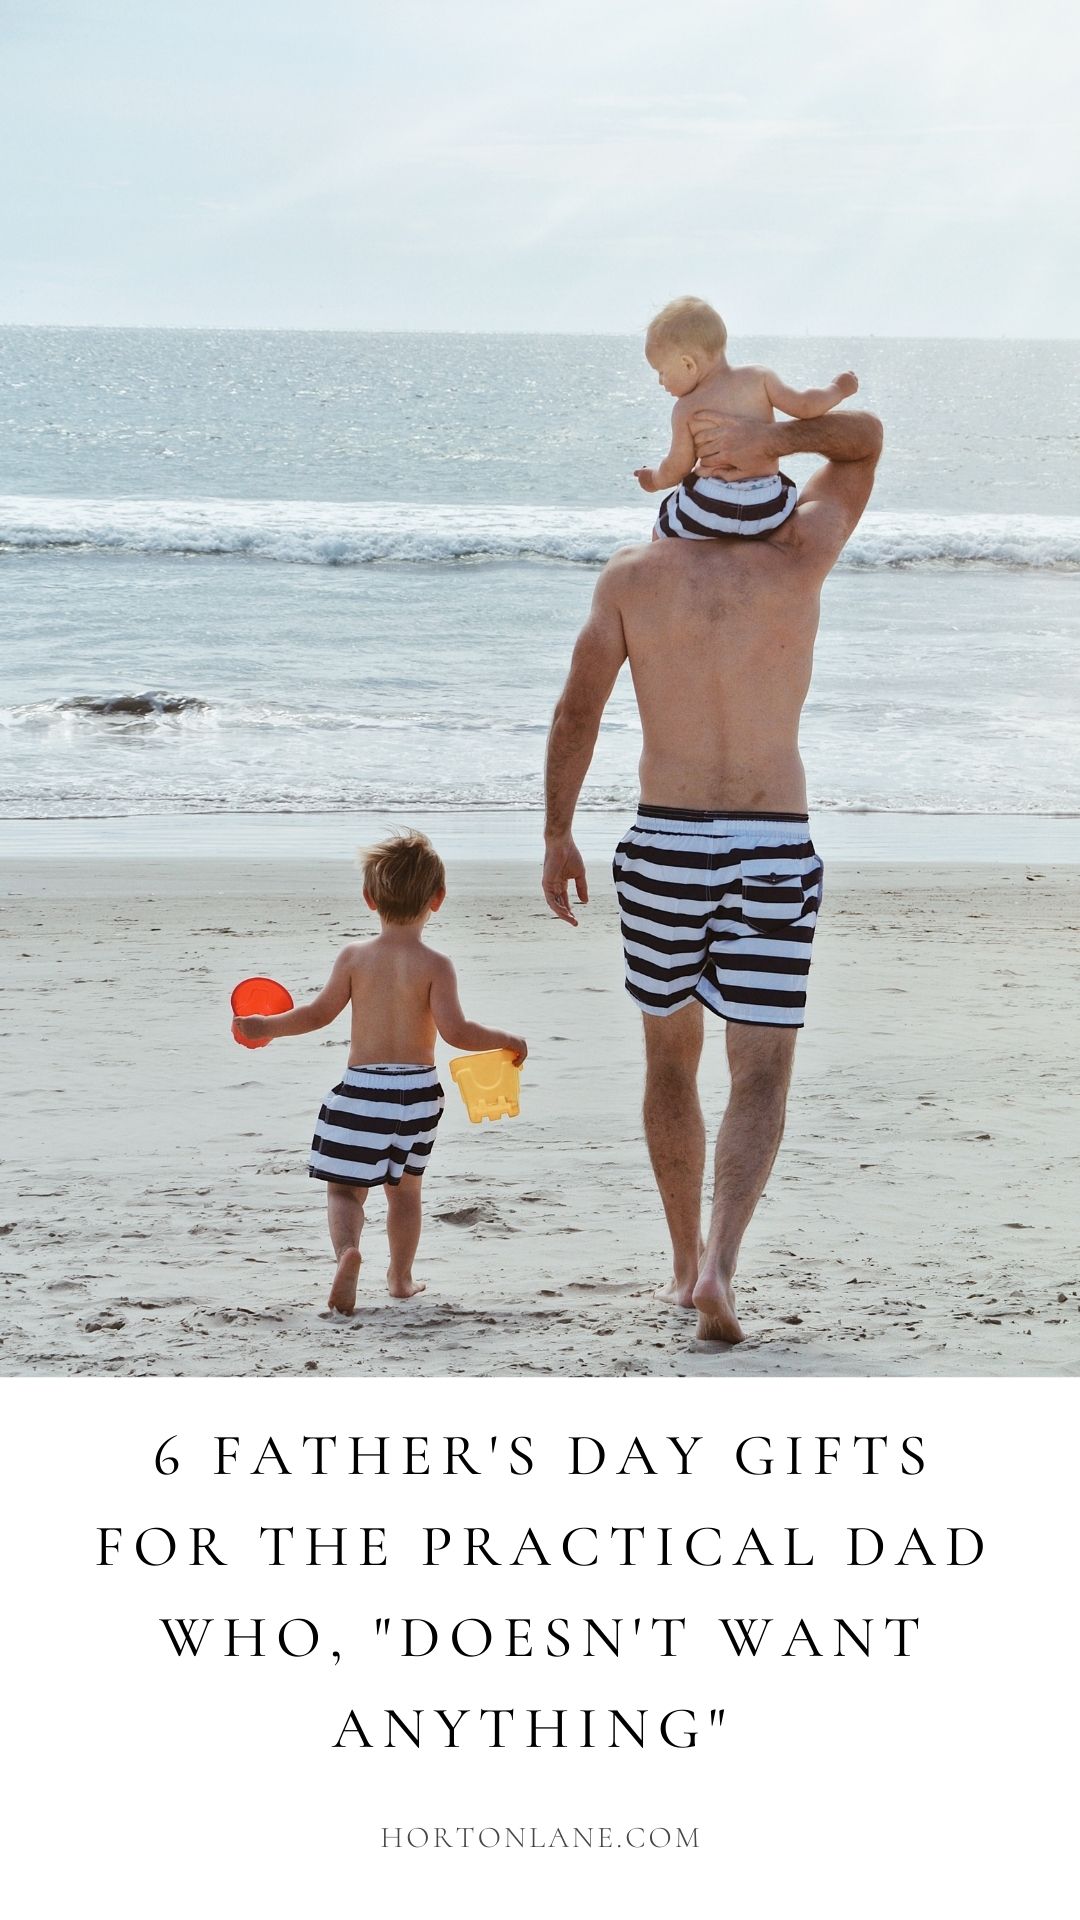 Pinterest Pin-6 Father's Day Gifts for the Practical Dad Who, "Doesn't Want Anything" from Amazon